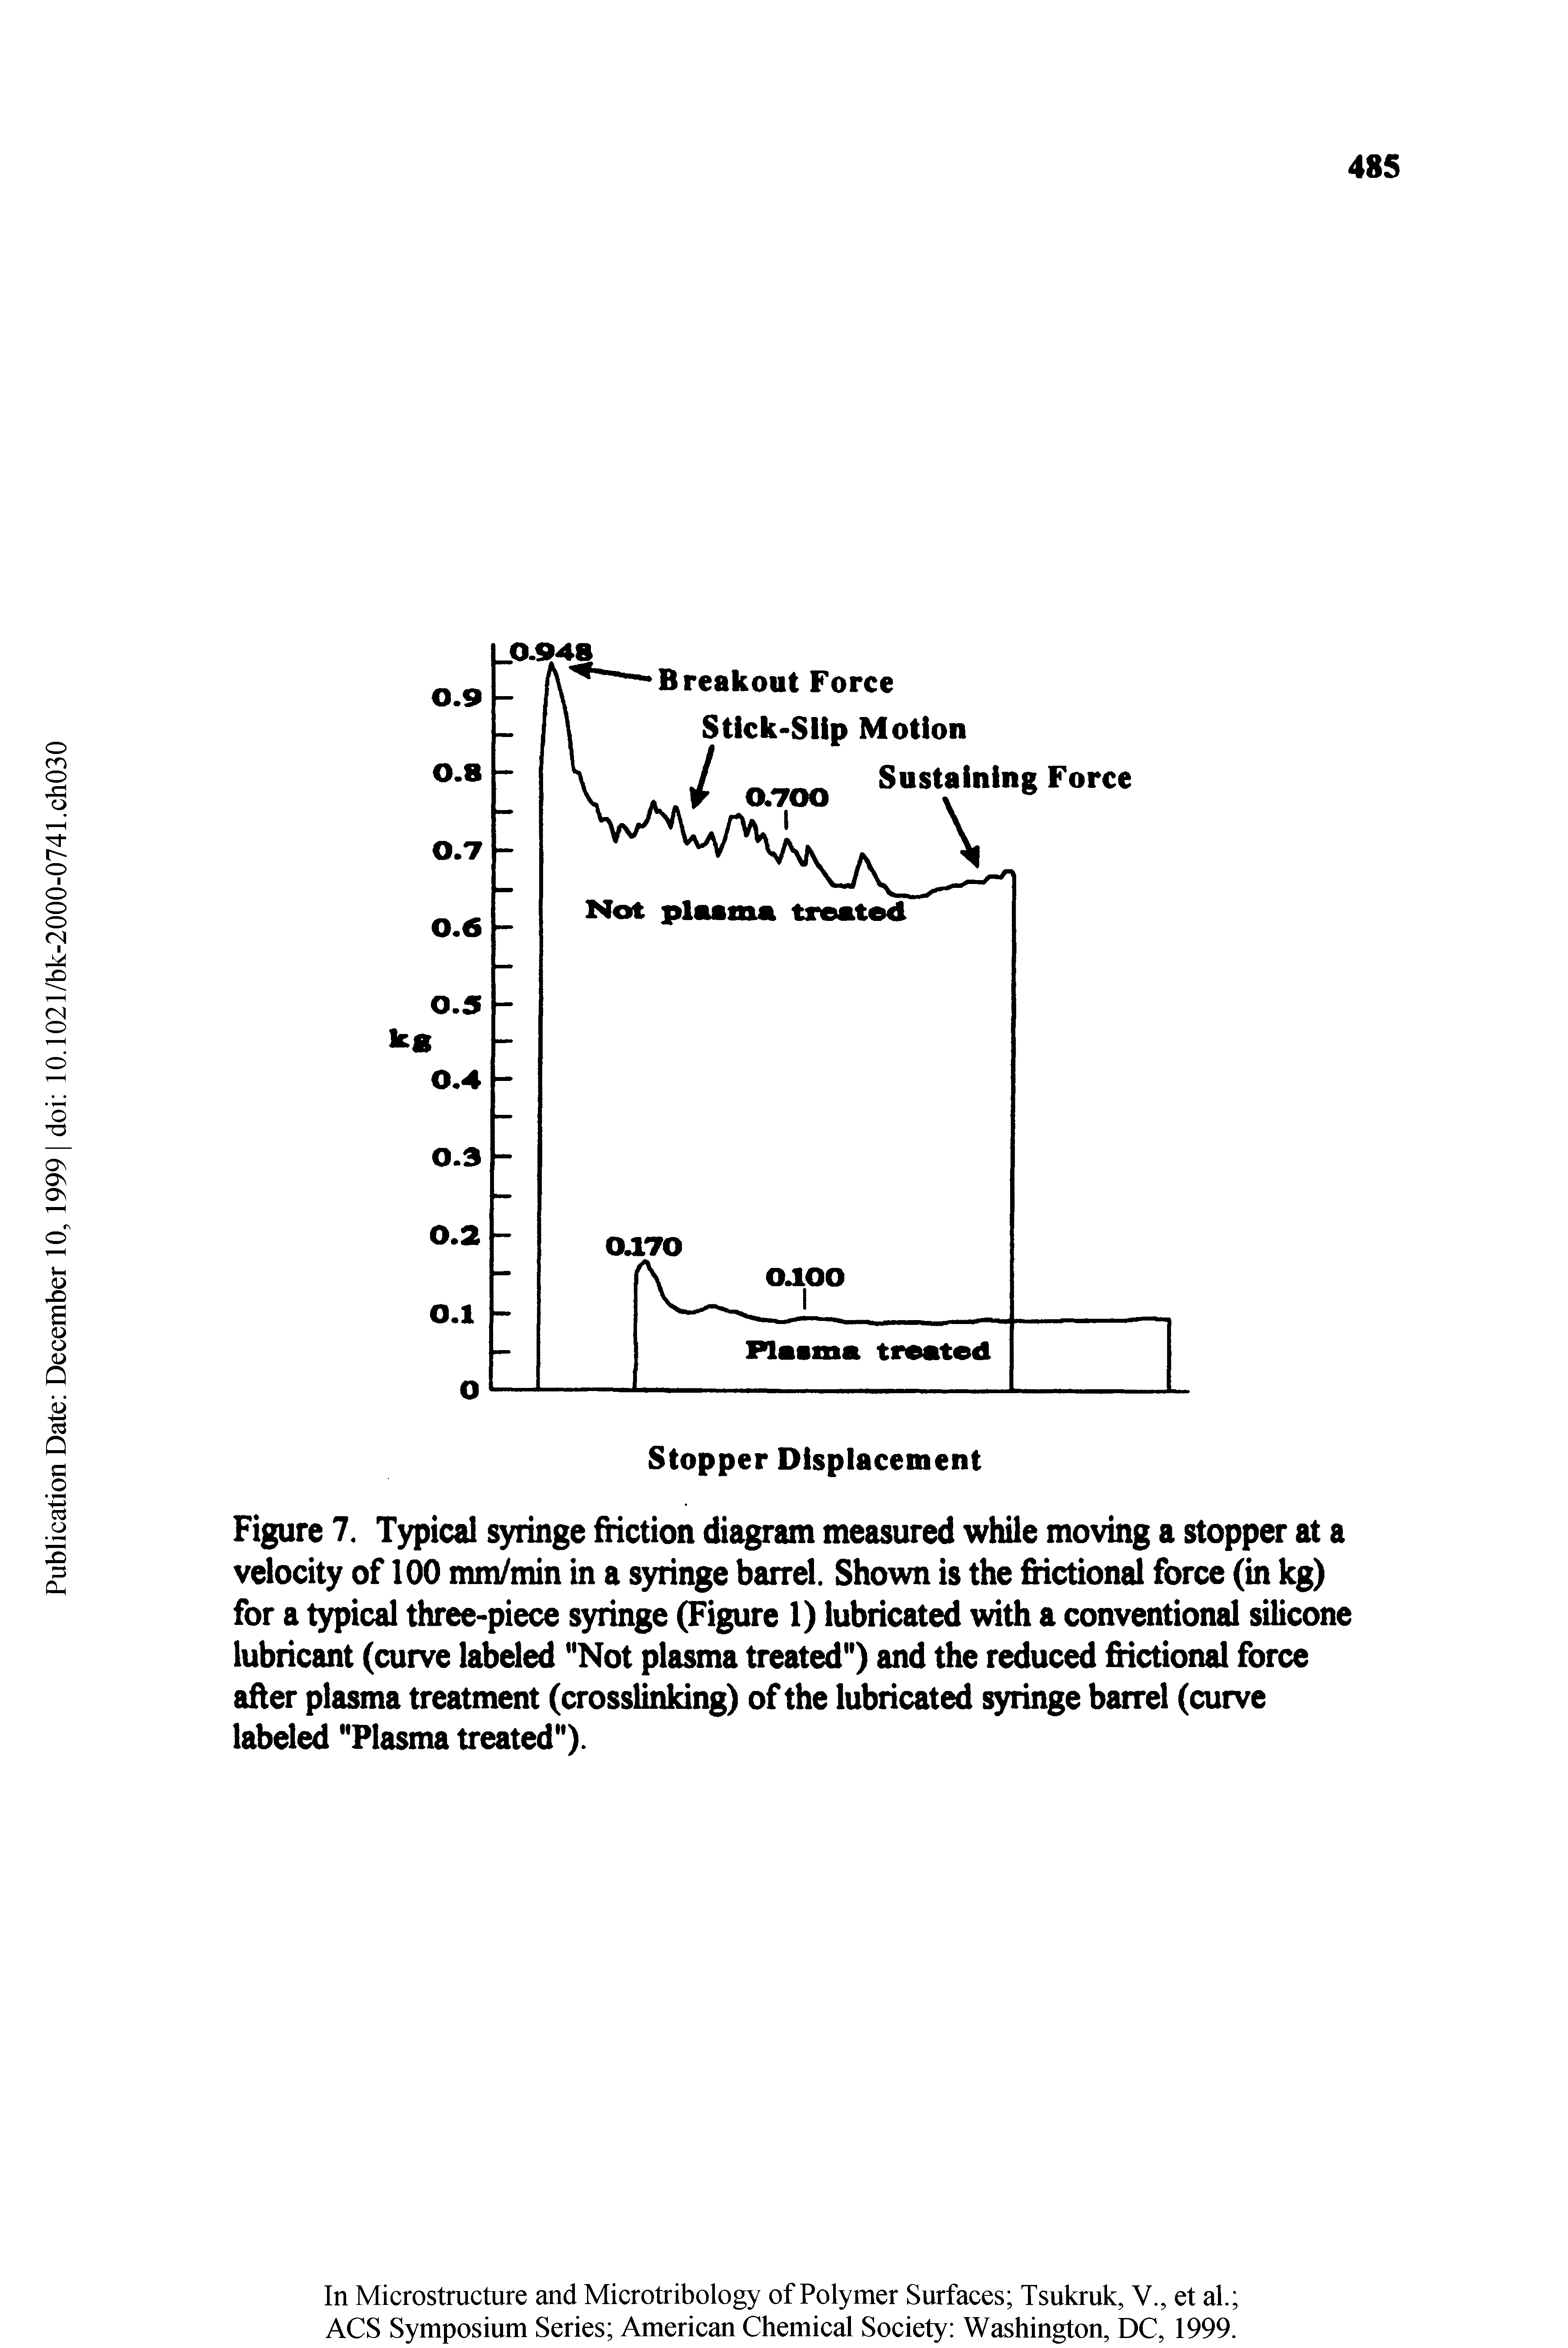 Figure 7. Typical syringe fnction diagram measured while moving a stopper at a velocity of 100 mm/min in a syringe barrel. Shown is the frictional force (in kg) for a typical three-piece syringe (Figure 1) lubricated with a conventional silicone lubricant (curve labeled "Not plasma treated") and the reduced frictional force after plasma treatment (crosslinking) of the lubricate syringe barrel (curve label "Plasma treated").